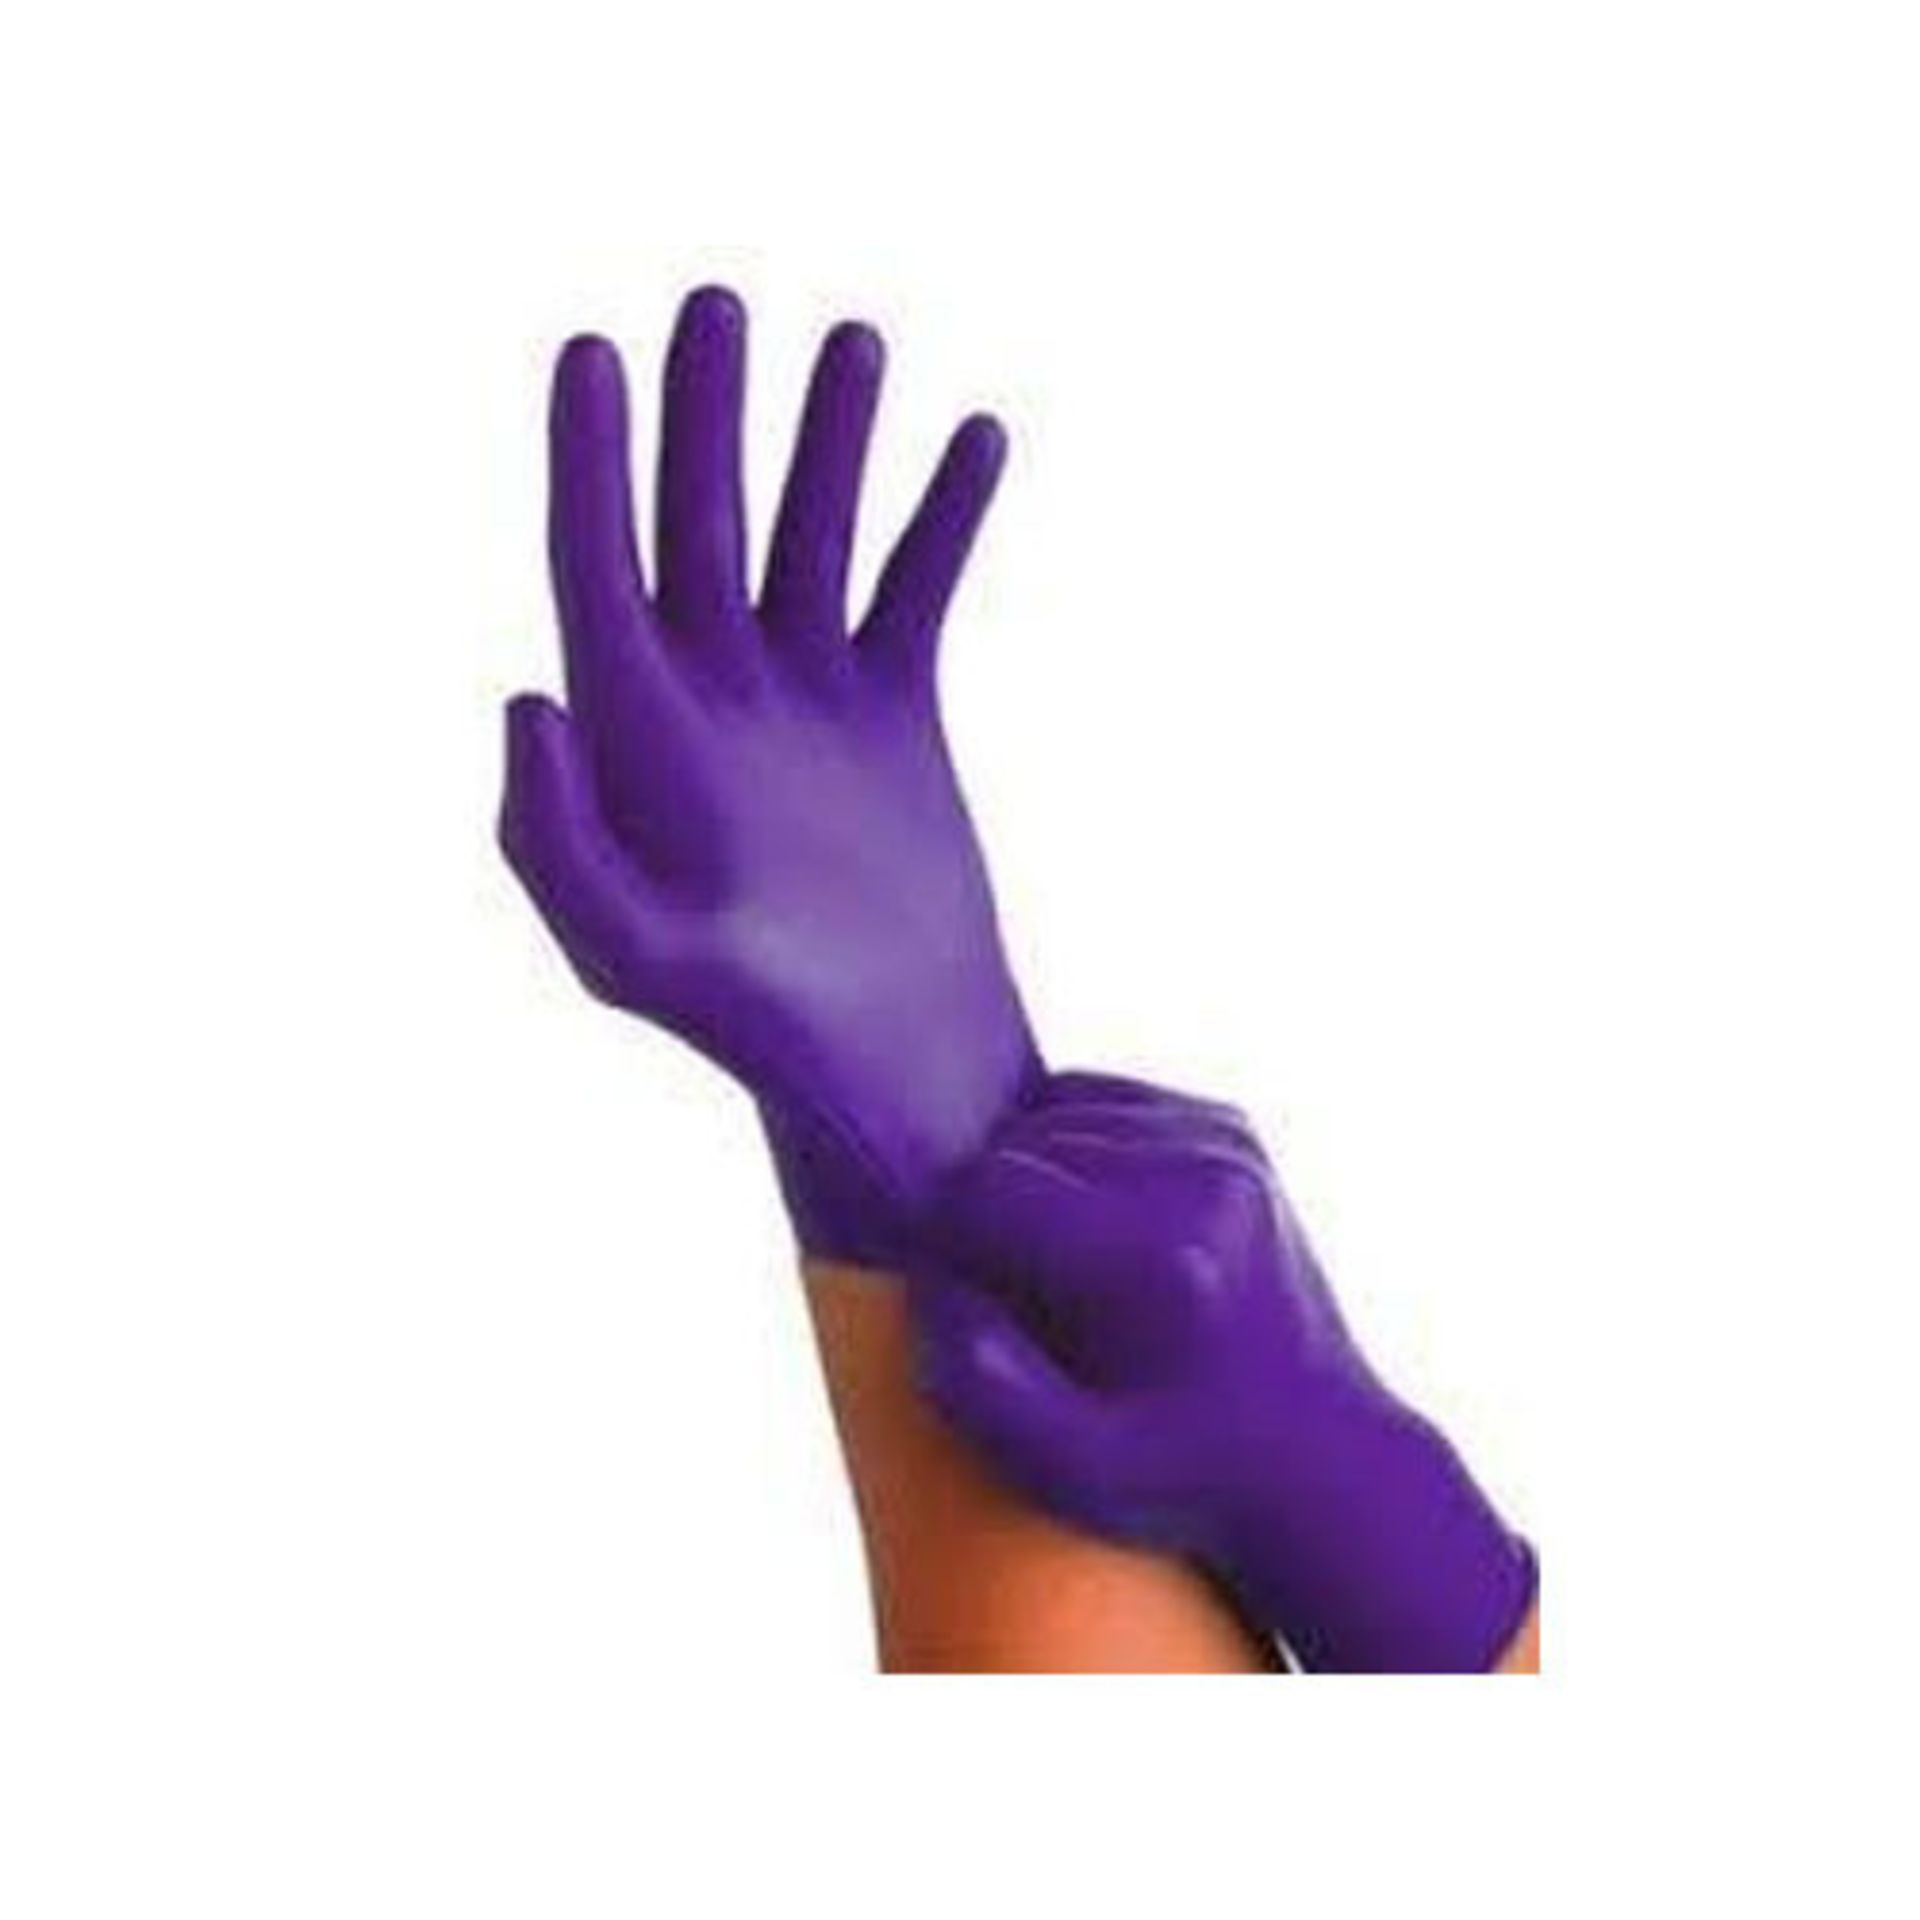 100 BOXES NITRILE GLOVES POWDER LATEX FREE PURPLE 100 BOXED RRP £1100 - Image 4 of 4